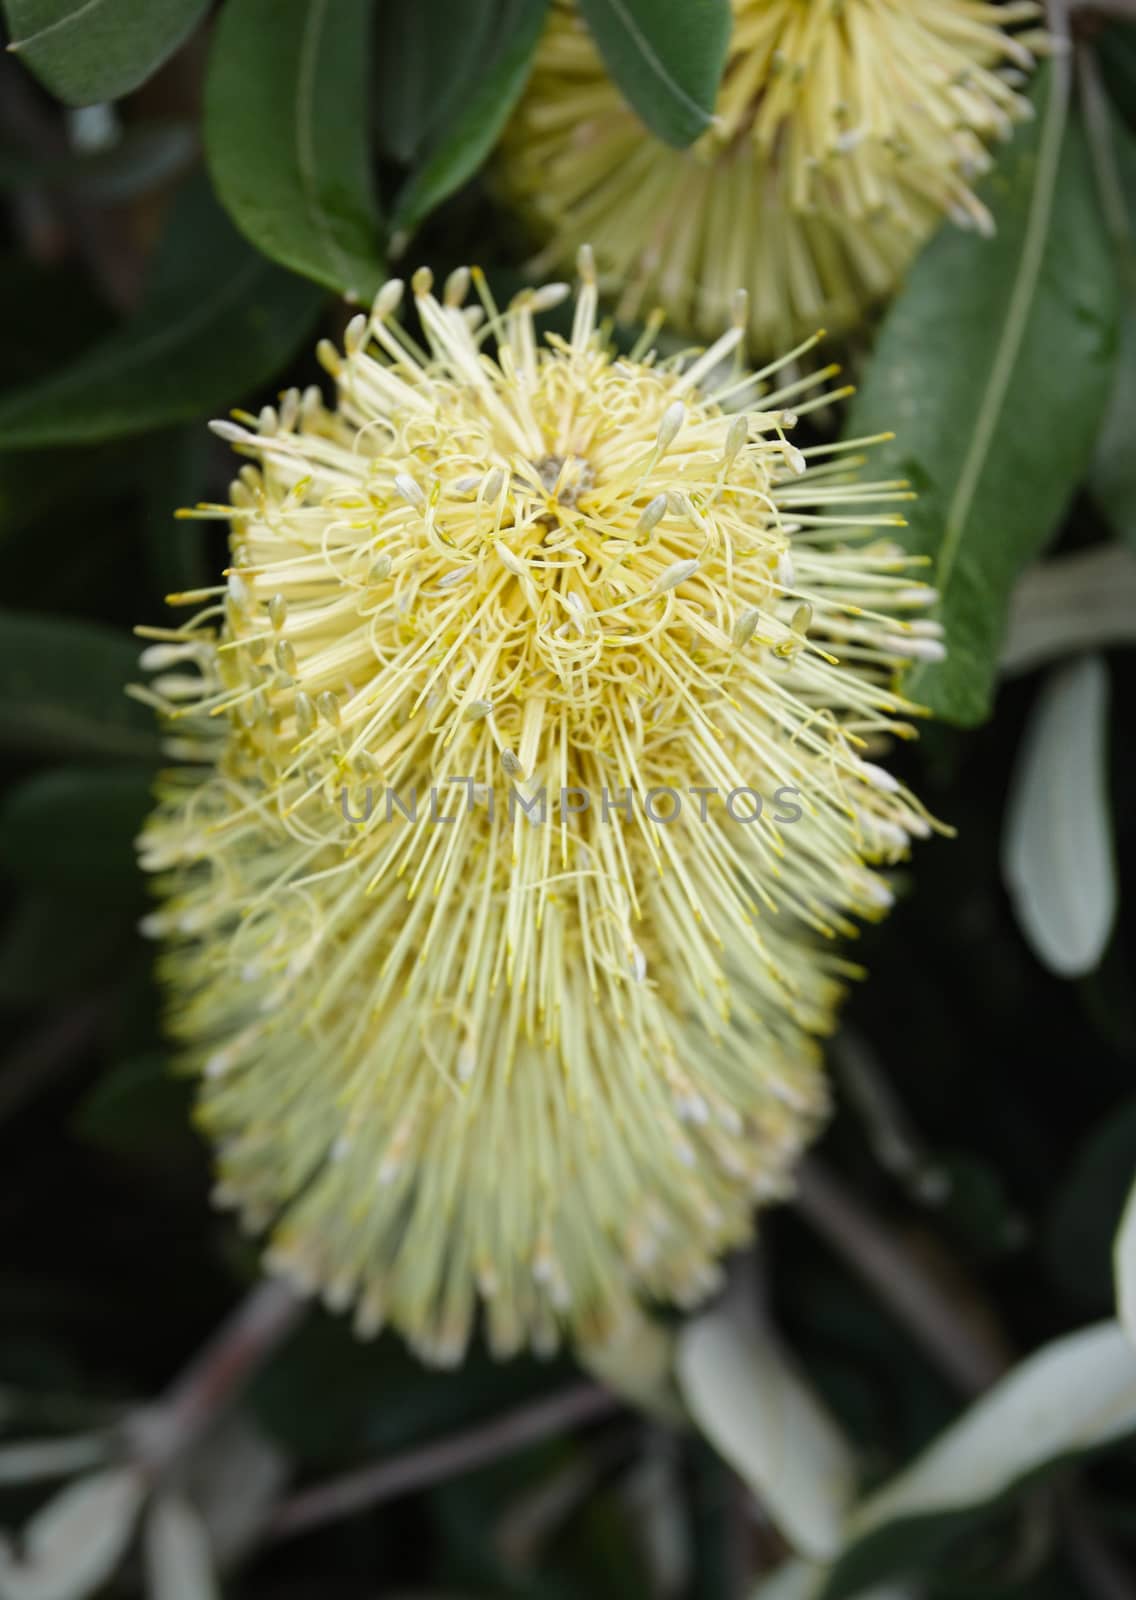 Yellow banksia flower, Banksia integrifolia.  Overhead view looking down with focus to top of flowerhead cone.  This plant has grey green leaves.